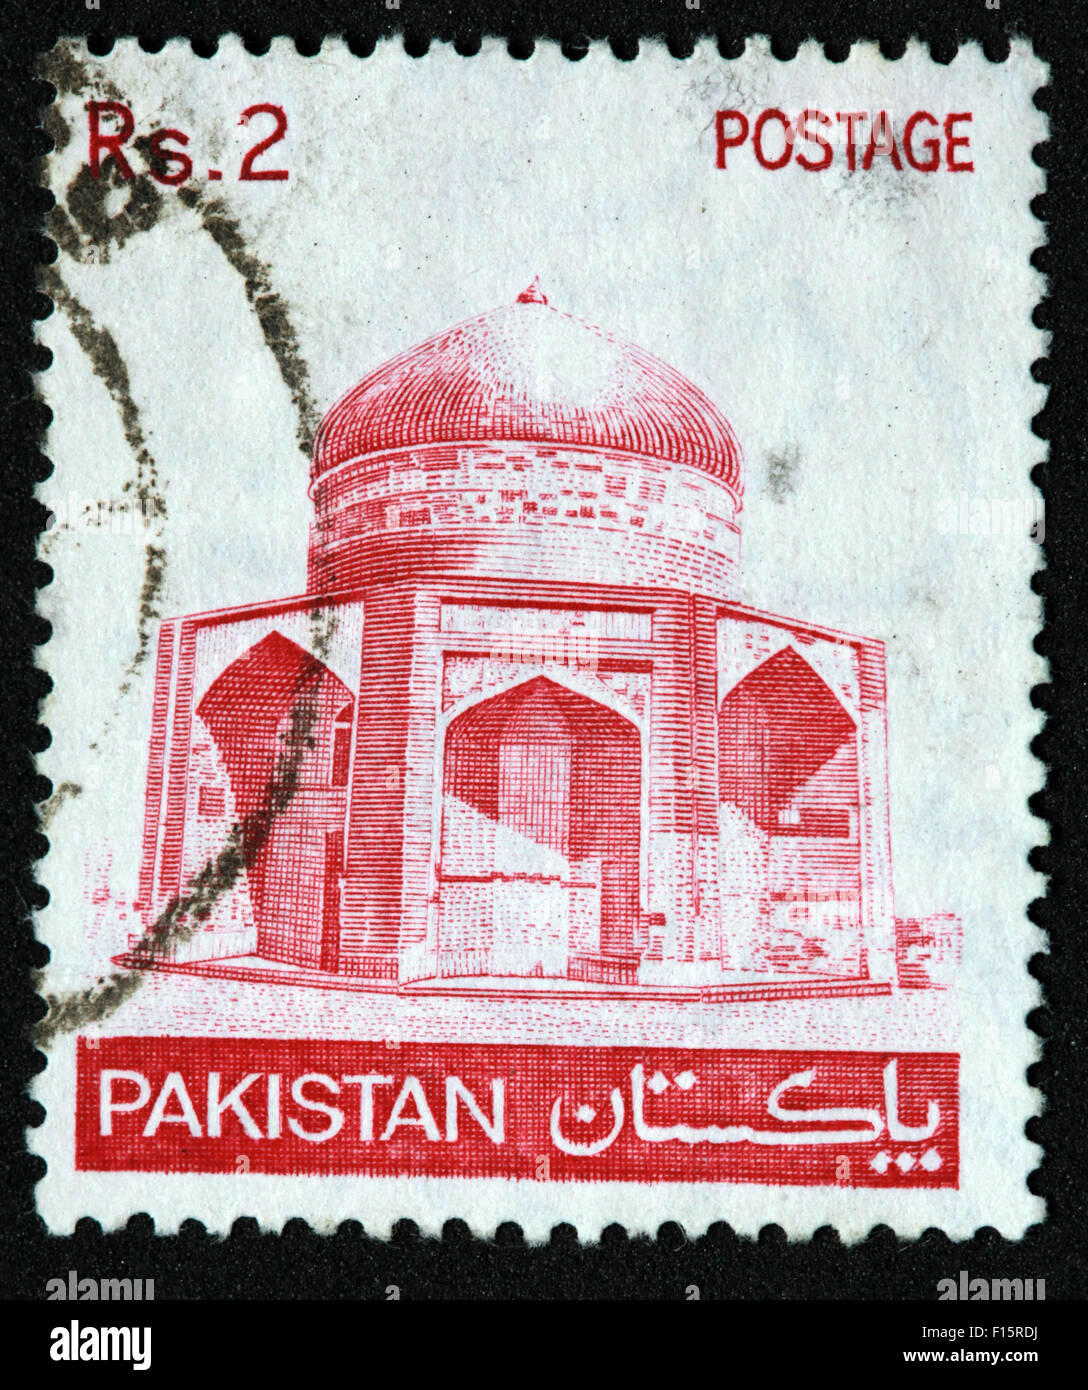 Pakistan Porto Rs2 Rs rote Moschee Stempel Stockfoto